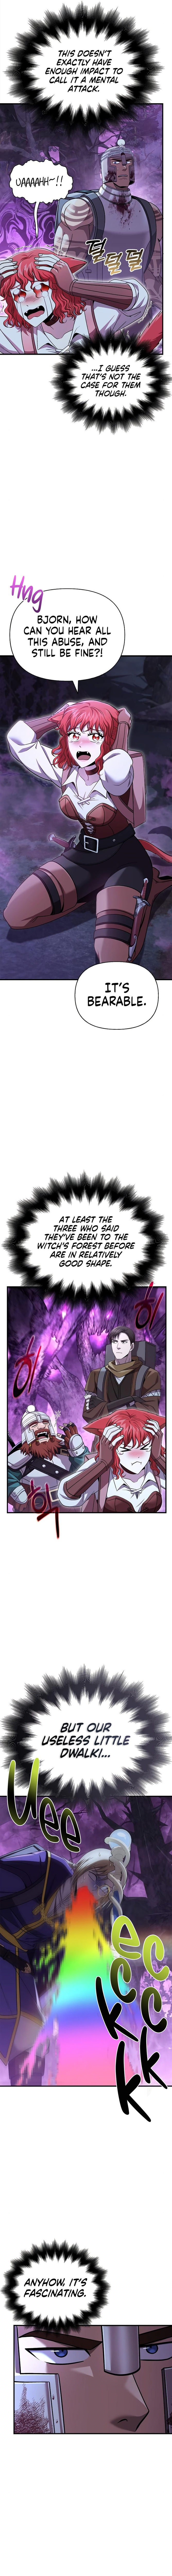 surviving-the-game-as-a-barbarian-chap-43-9